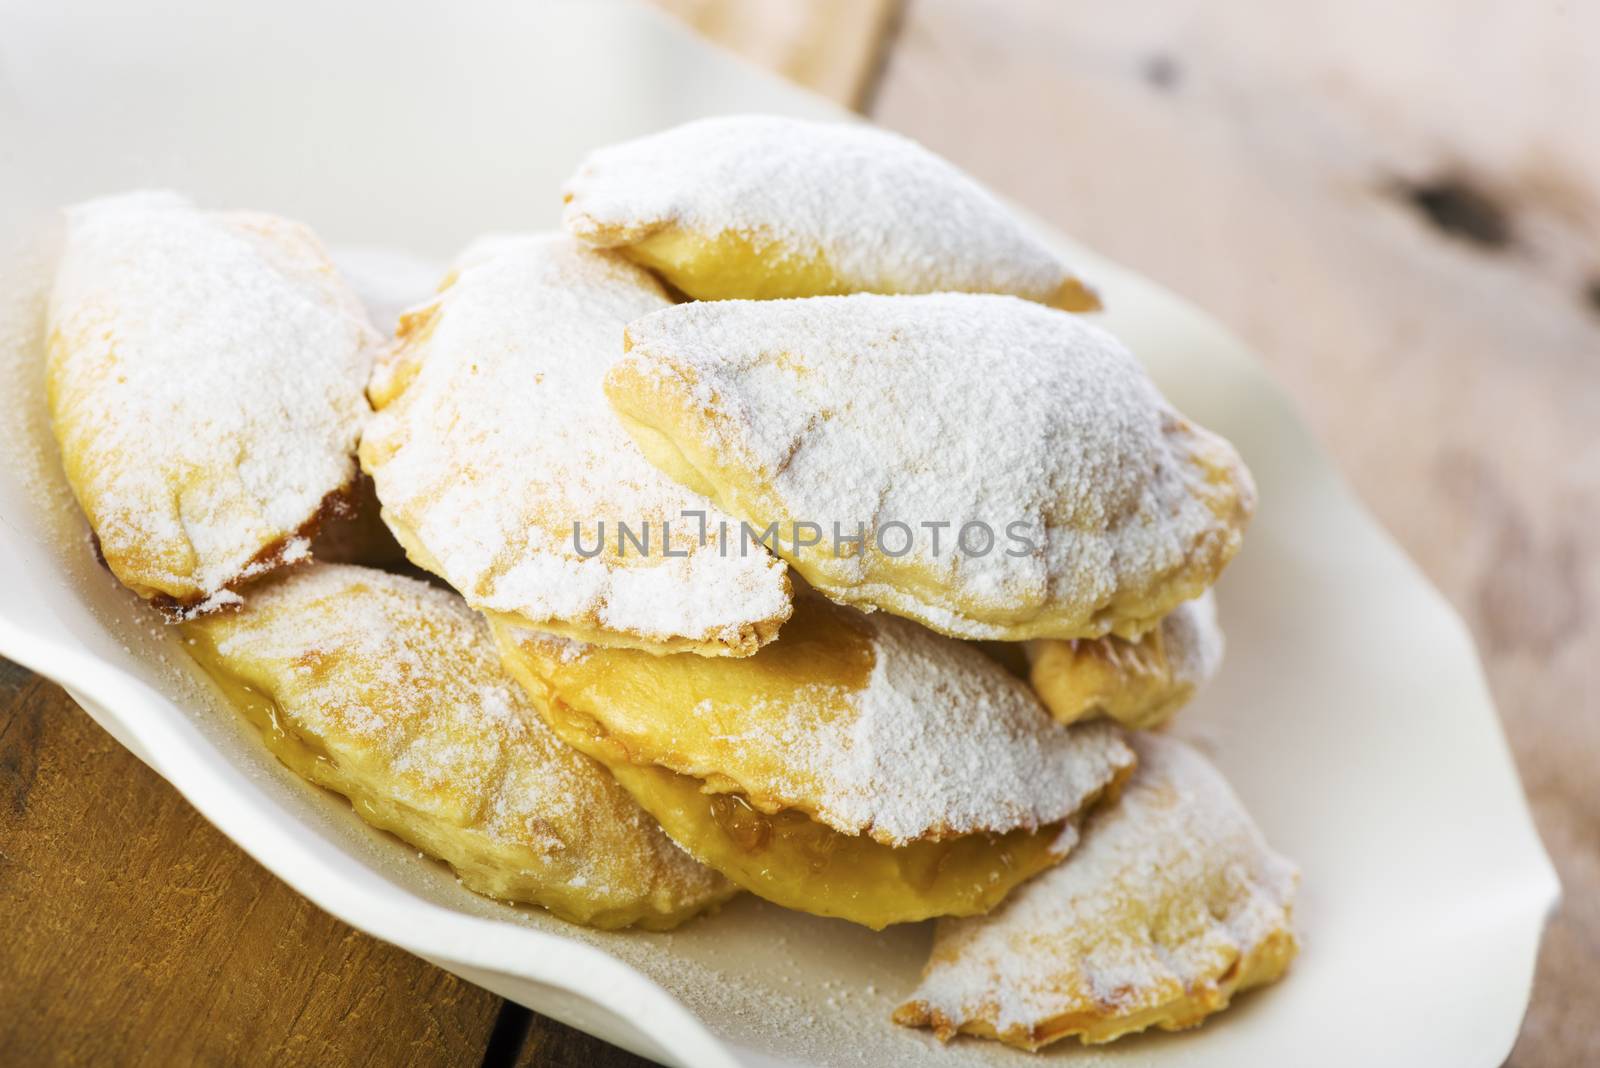 Close up Delicious Cookies with Sugar on Plate with White Paper, Placed on Wooden Table.